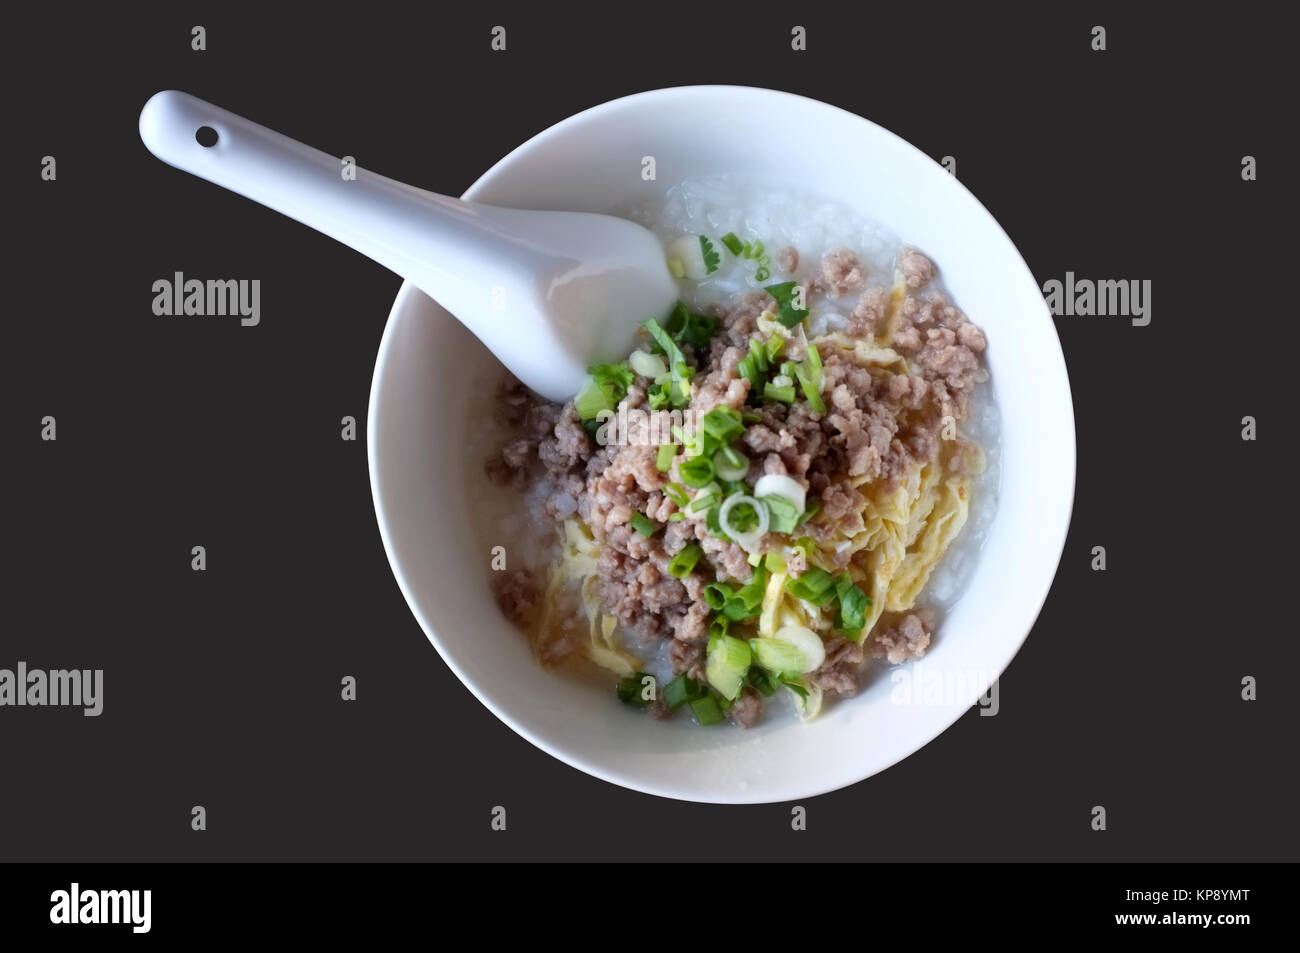 Soft boiled rice with mince pork, Congee in white bowl isolated on black background Stock Photo